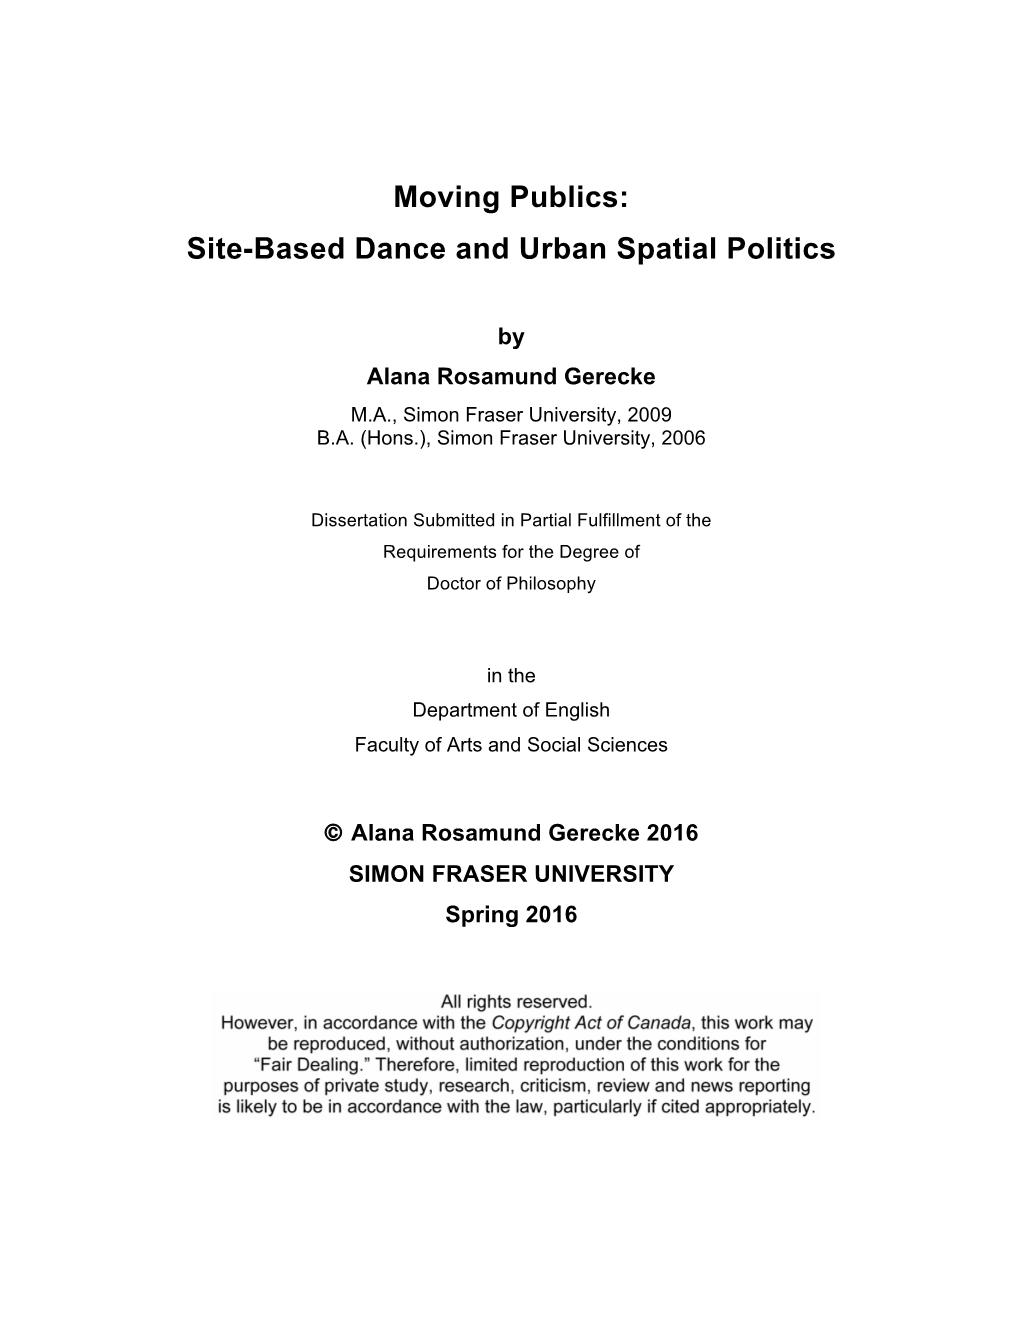 Site-Based Dance and Urban Spatial Politics